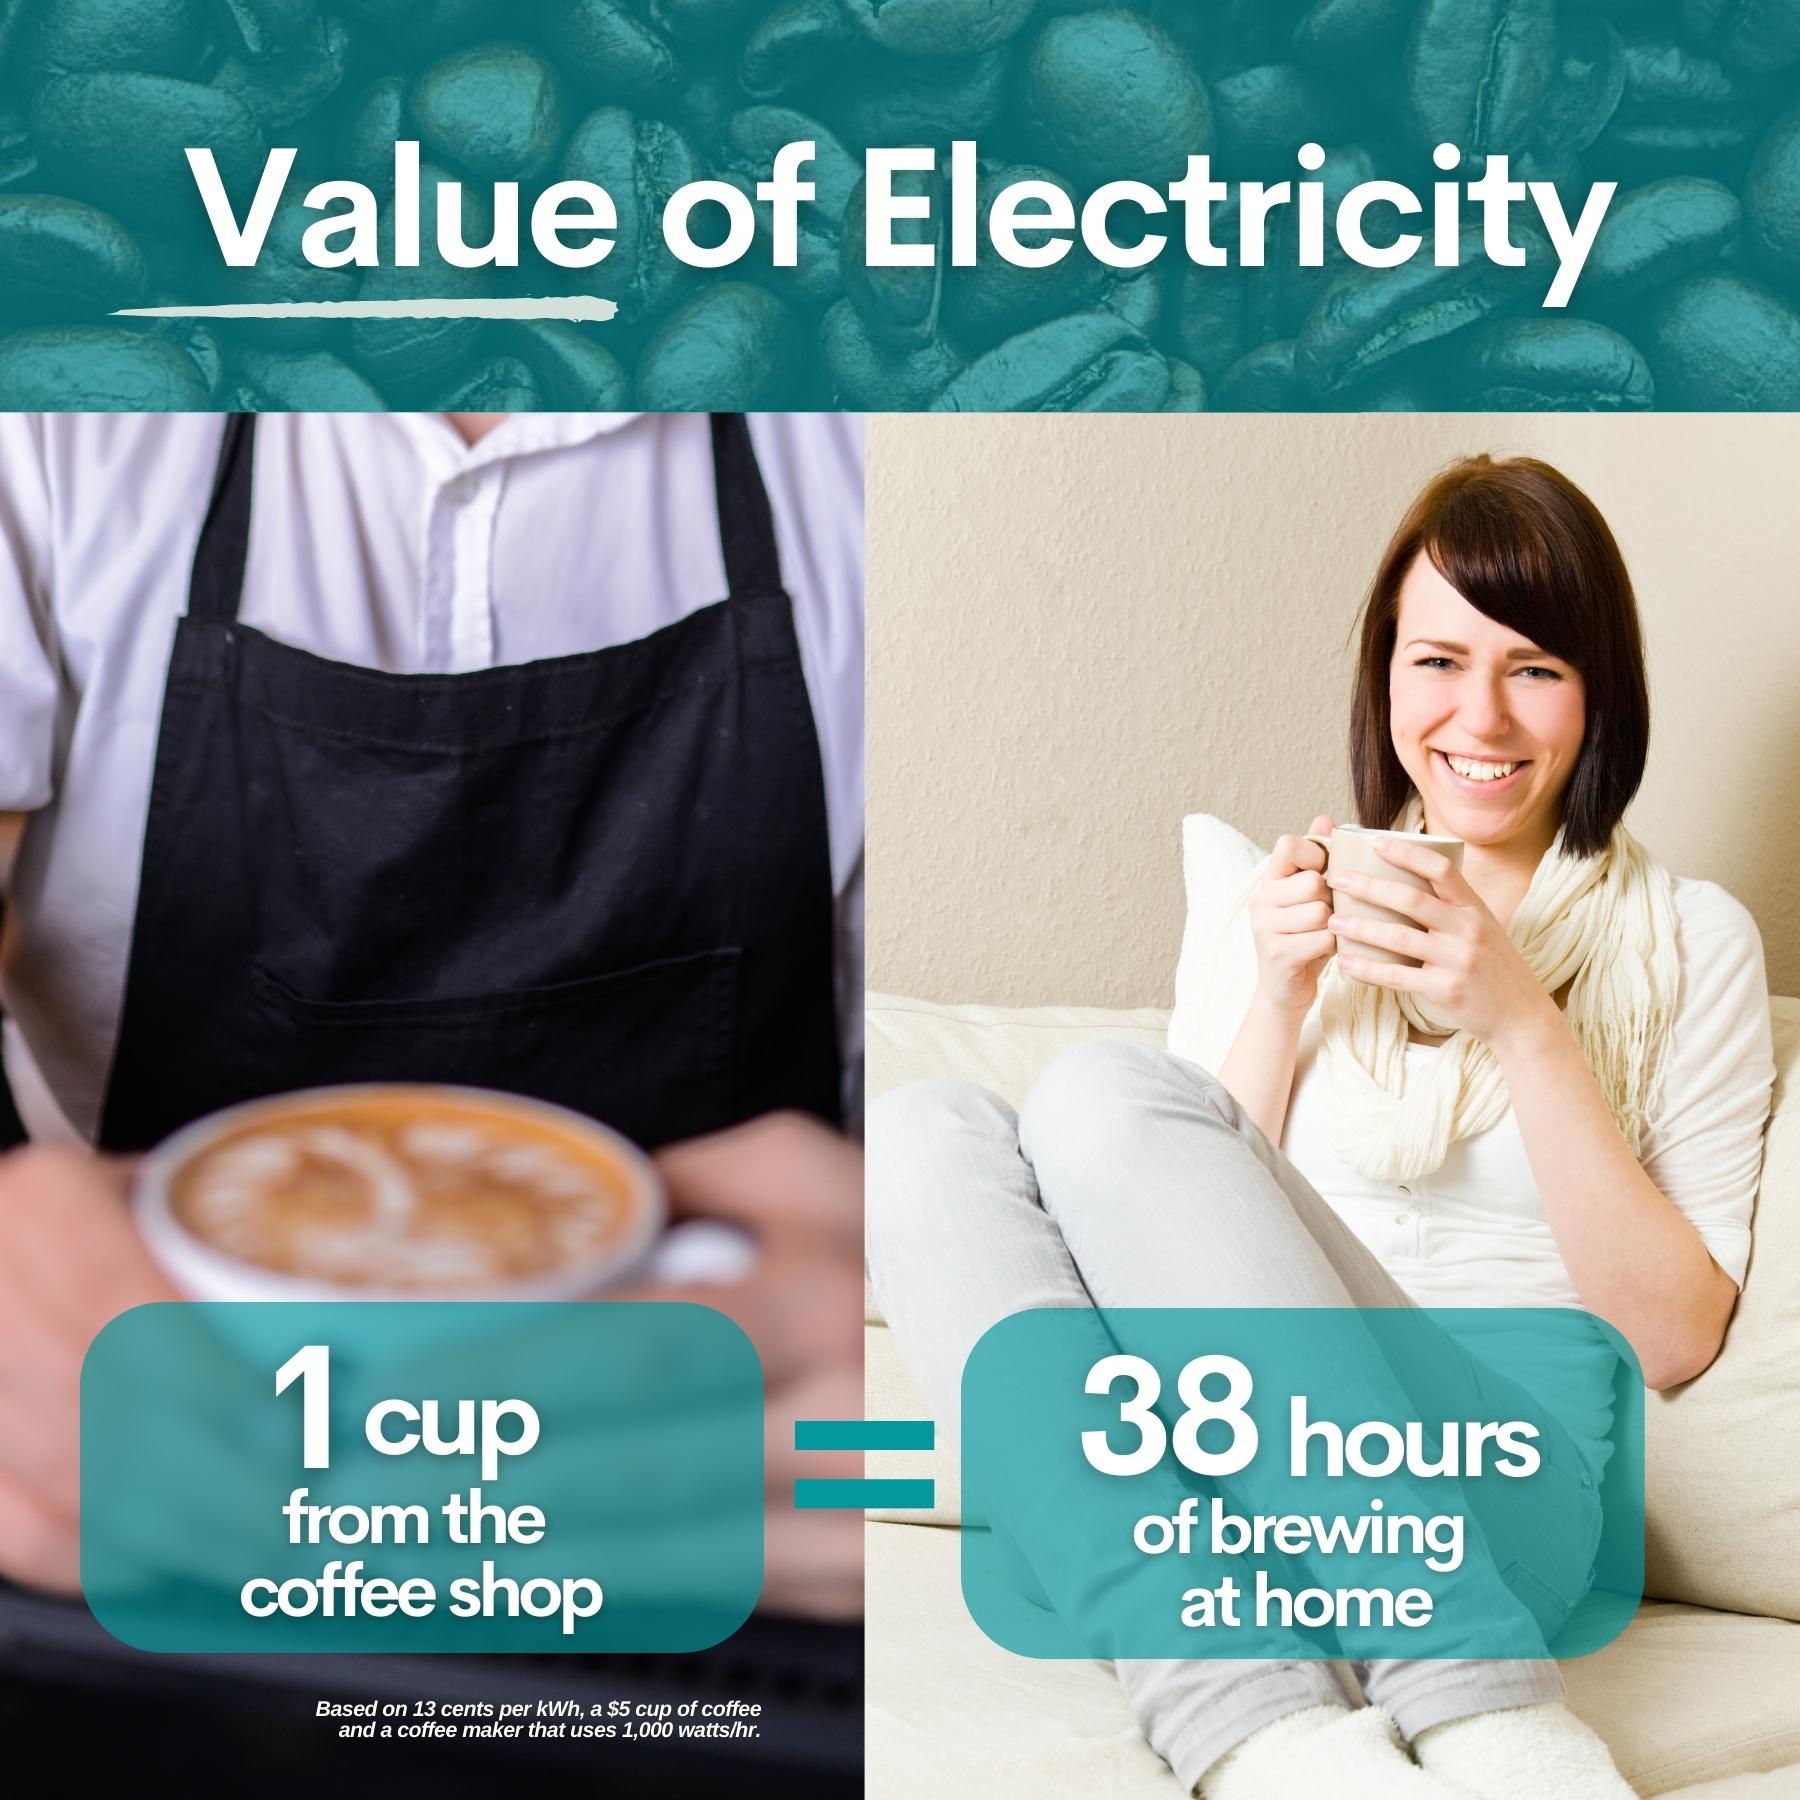 Photo showing 1 $5 cup of coffee is equivalent to the electricity cost of brewing coffee at home for 38 hours.